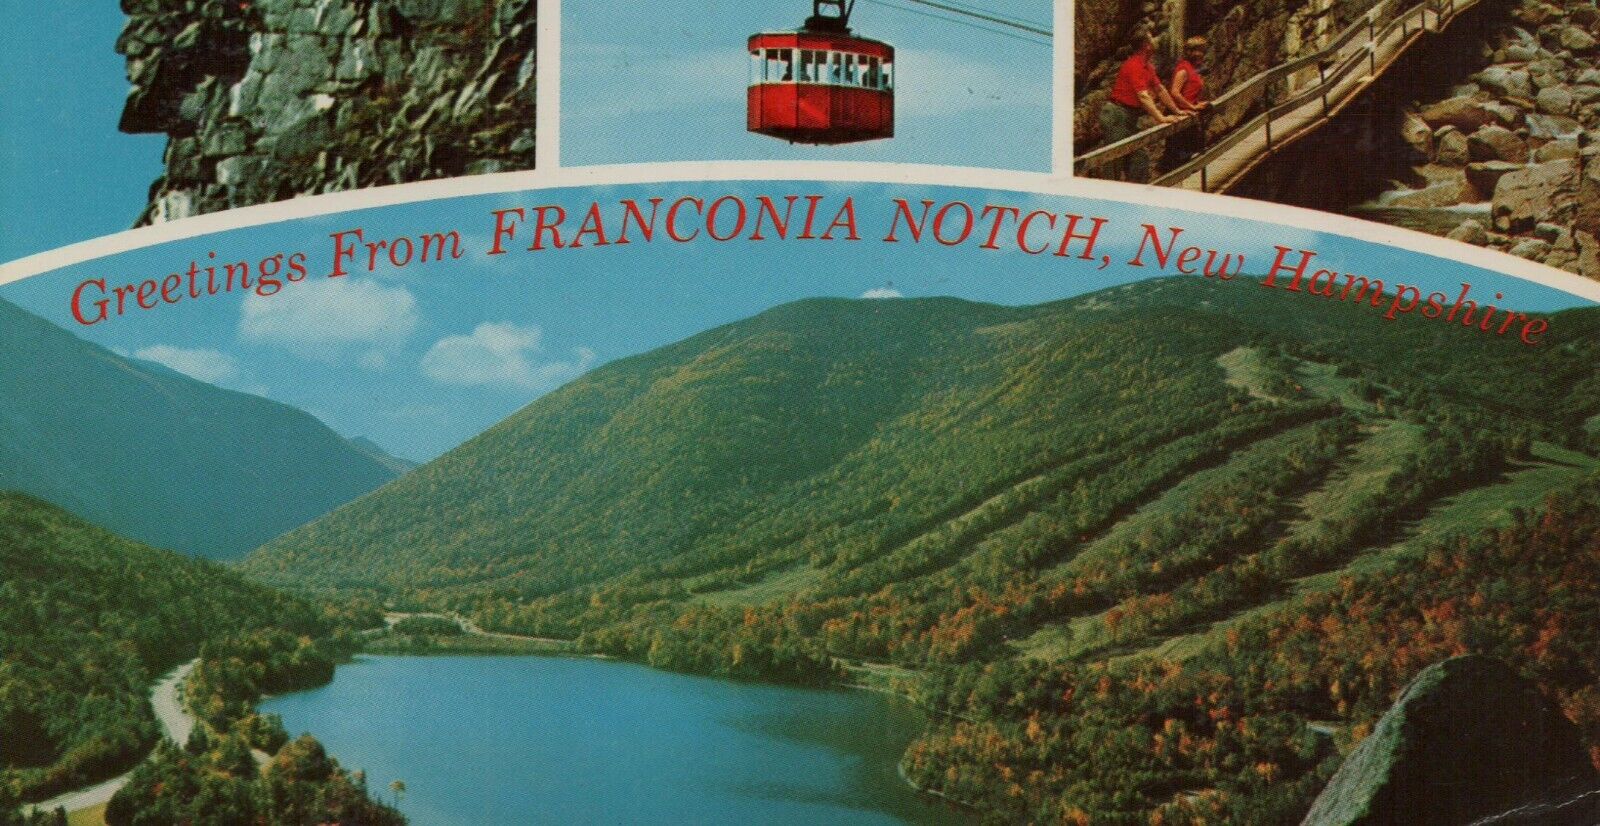  Vtg Postcard Greetings From Franconia Notch New Hampshire 1967